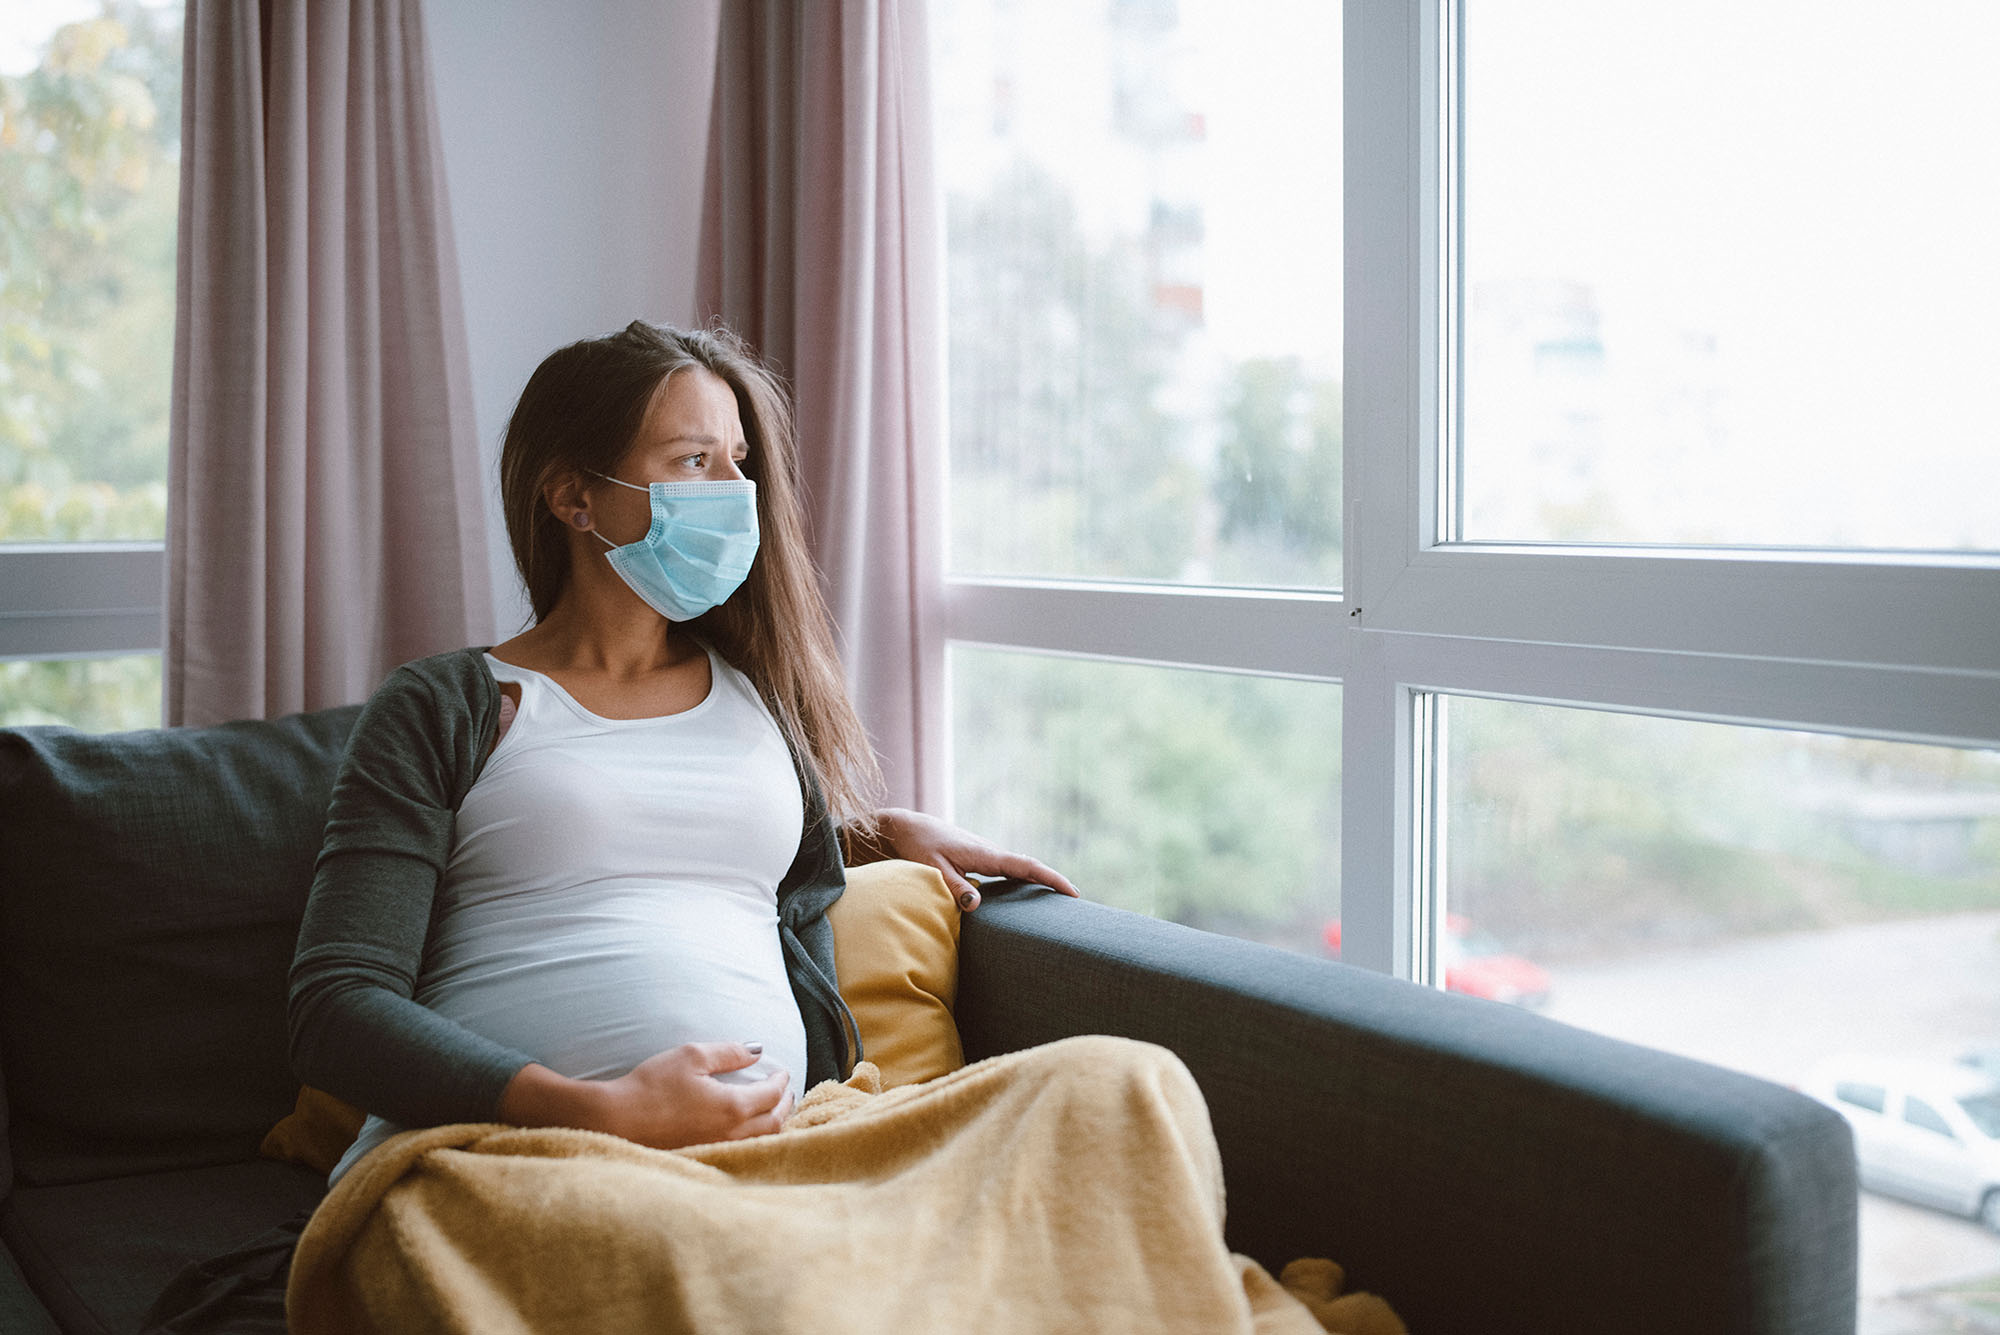 photo of a worried, white pregnant woman sitting at home with protective face mask on and looking through the window on the right.